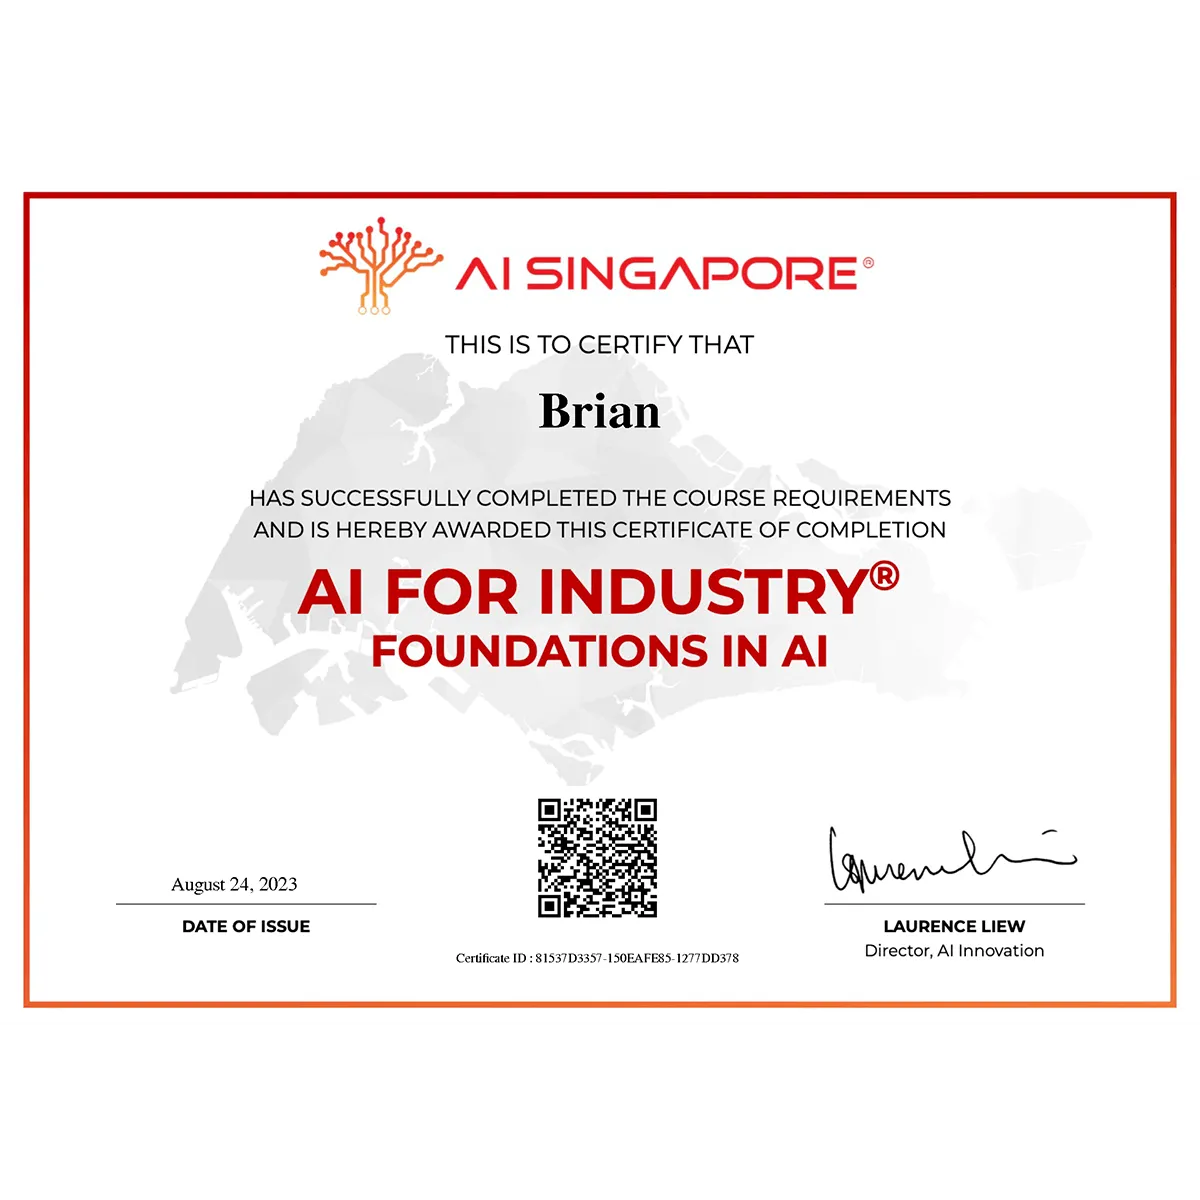 AI Singapore Foundations in AI certificate awarded to Brian Tham